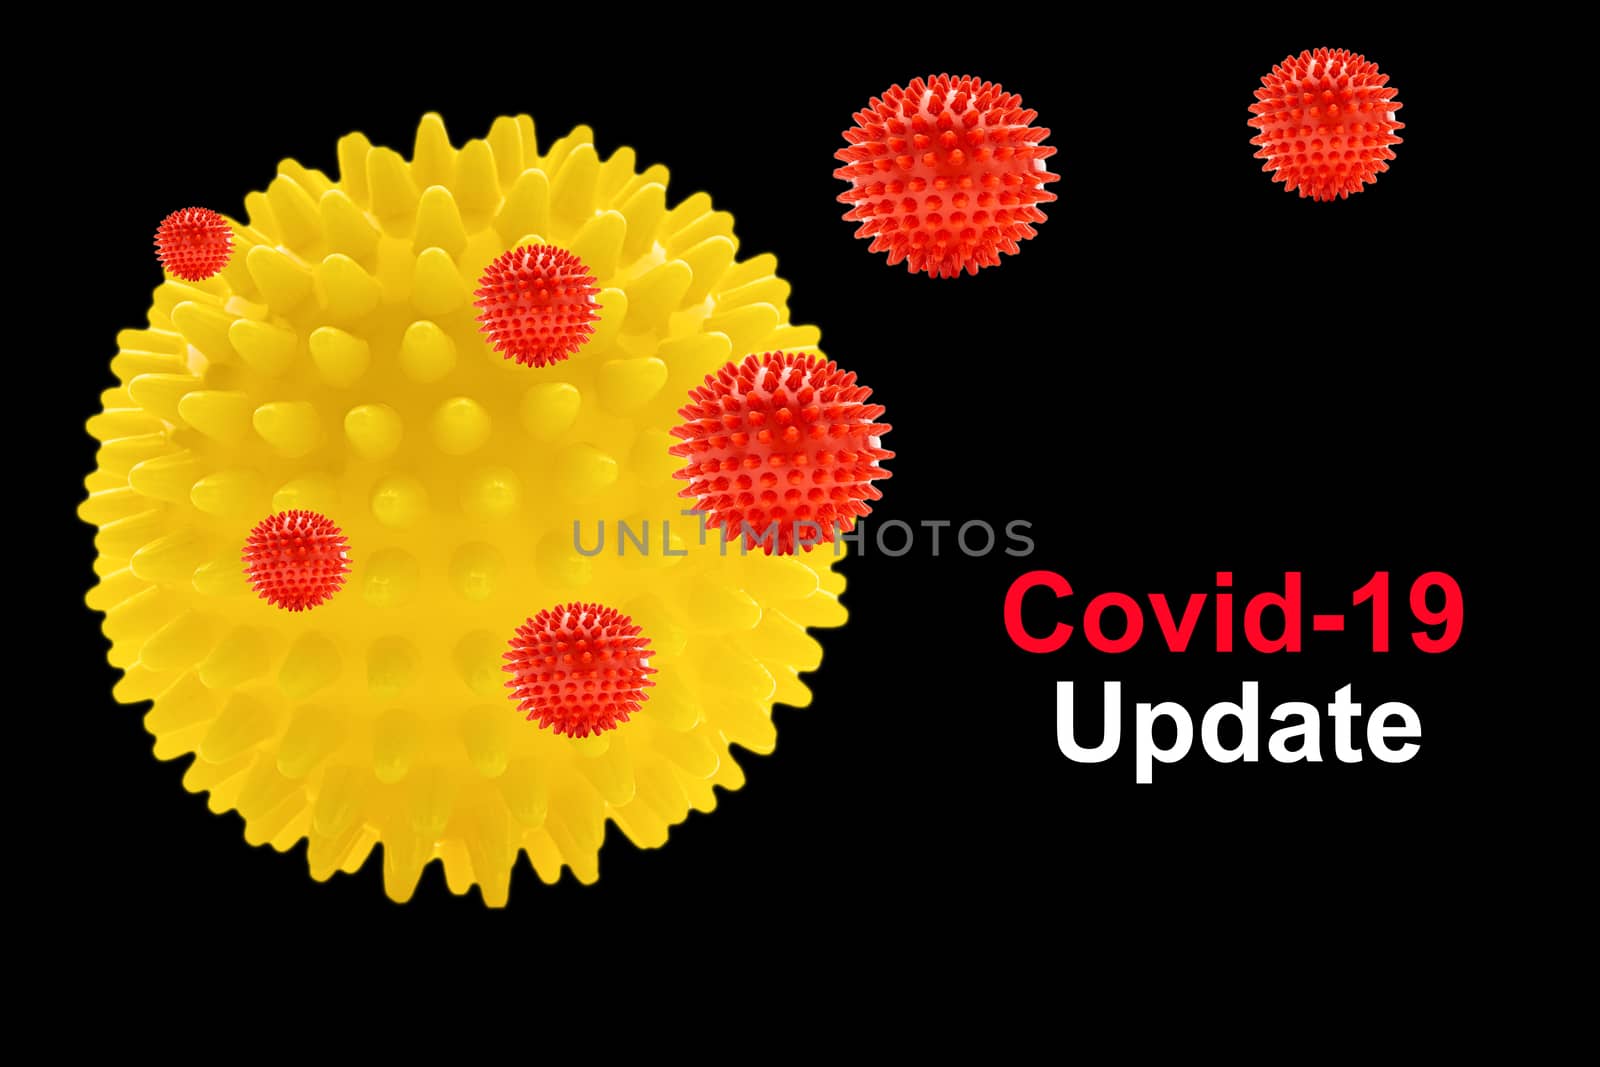 COVID-19 UPDATE text on black background. Covid-19 or Coronavirus by silverwings